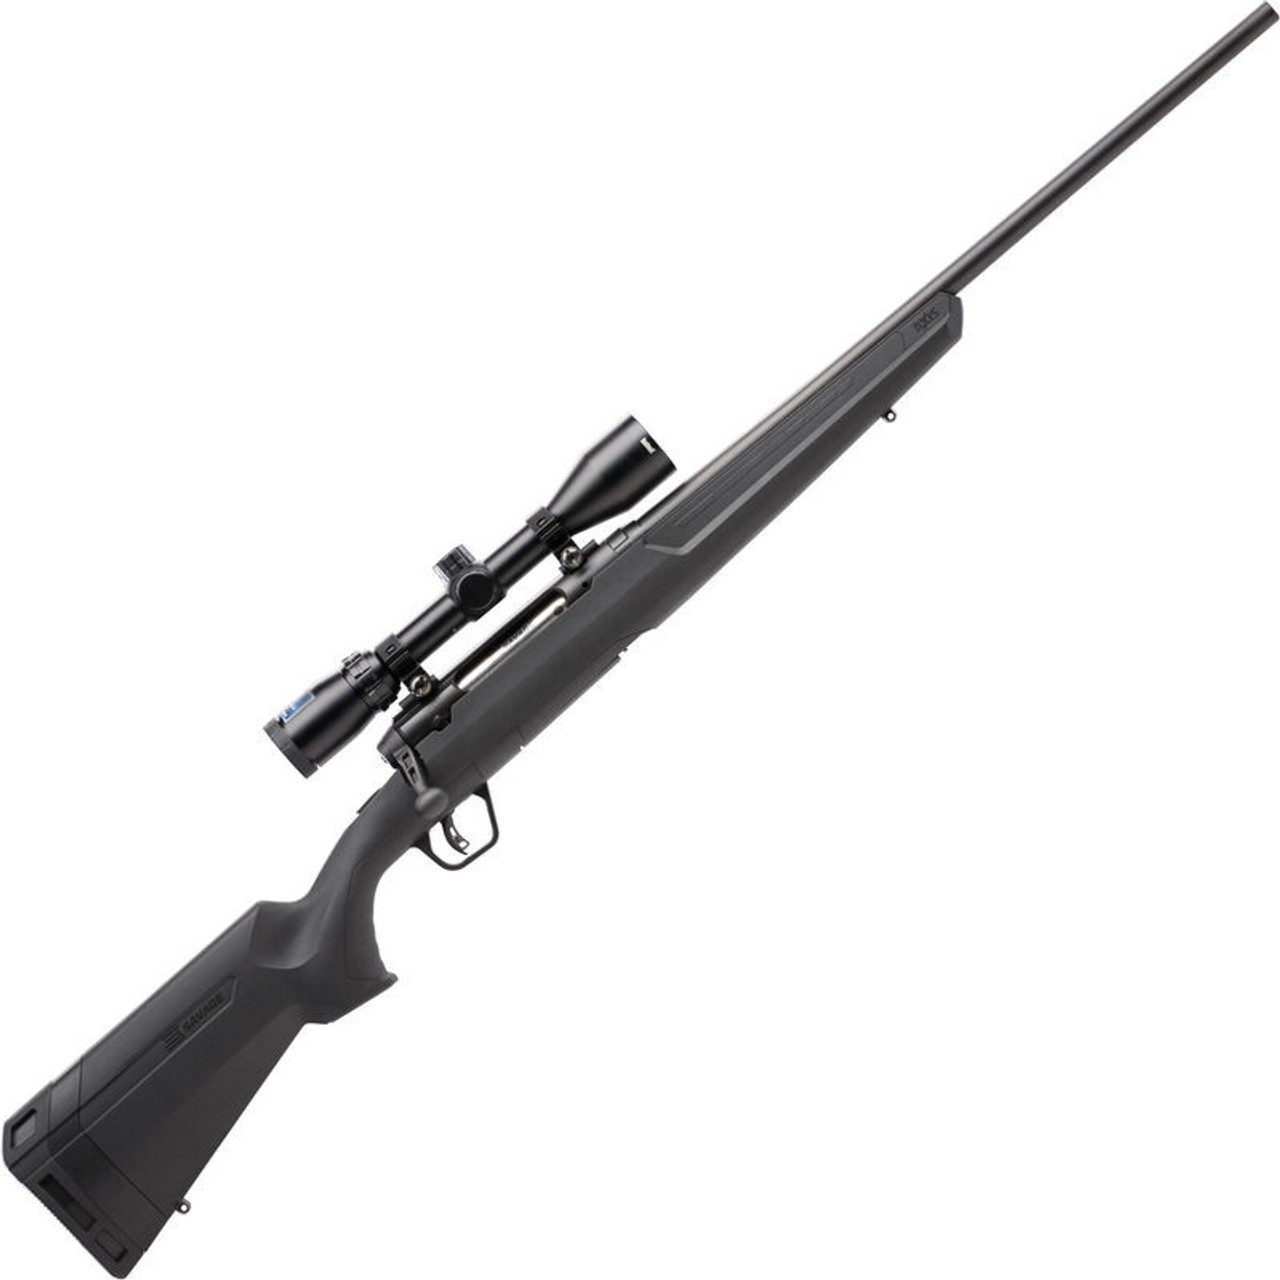 Savage 57098 Axis II XP Bolt Action Rifle 30-06 SPR, 22" Bbl., 3-9x40 Bushnell Banner Scope, 0685-1860